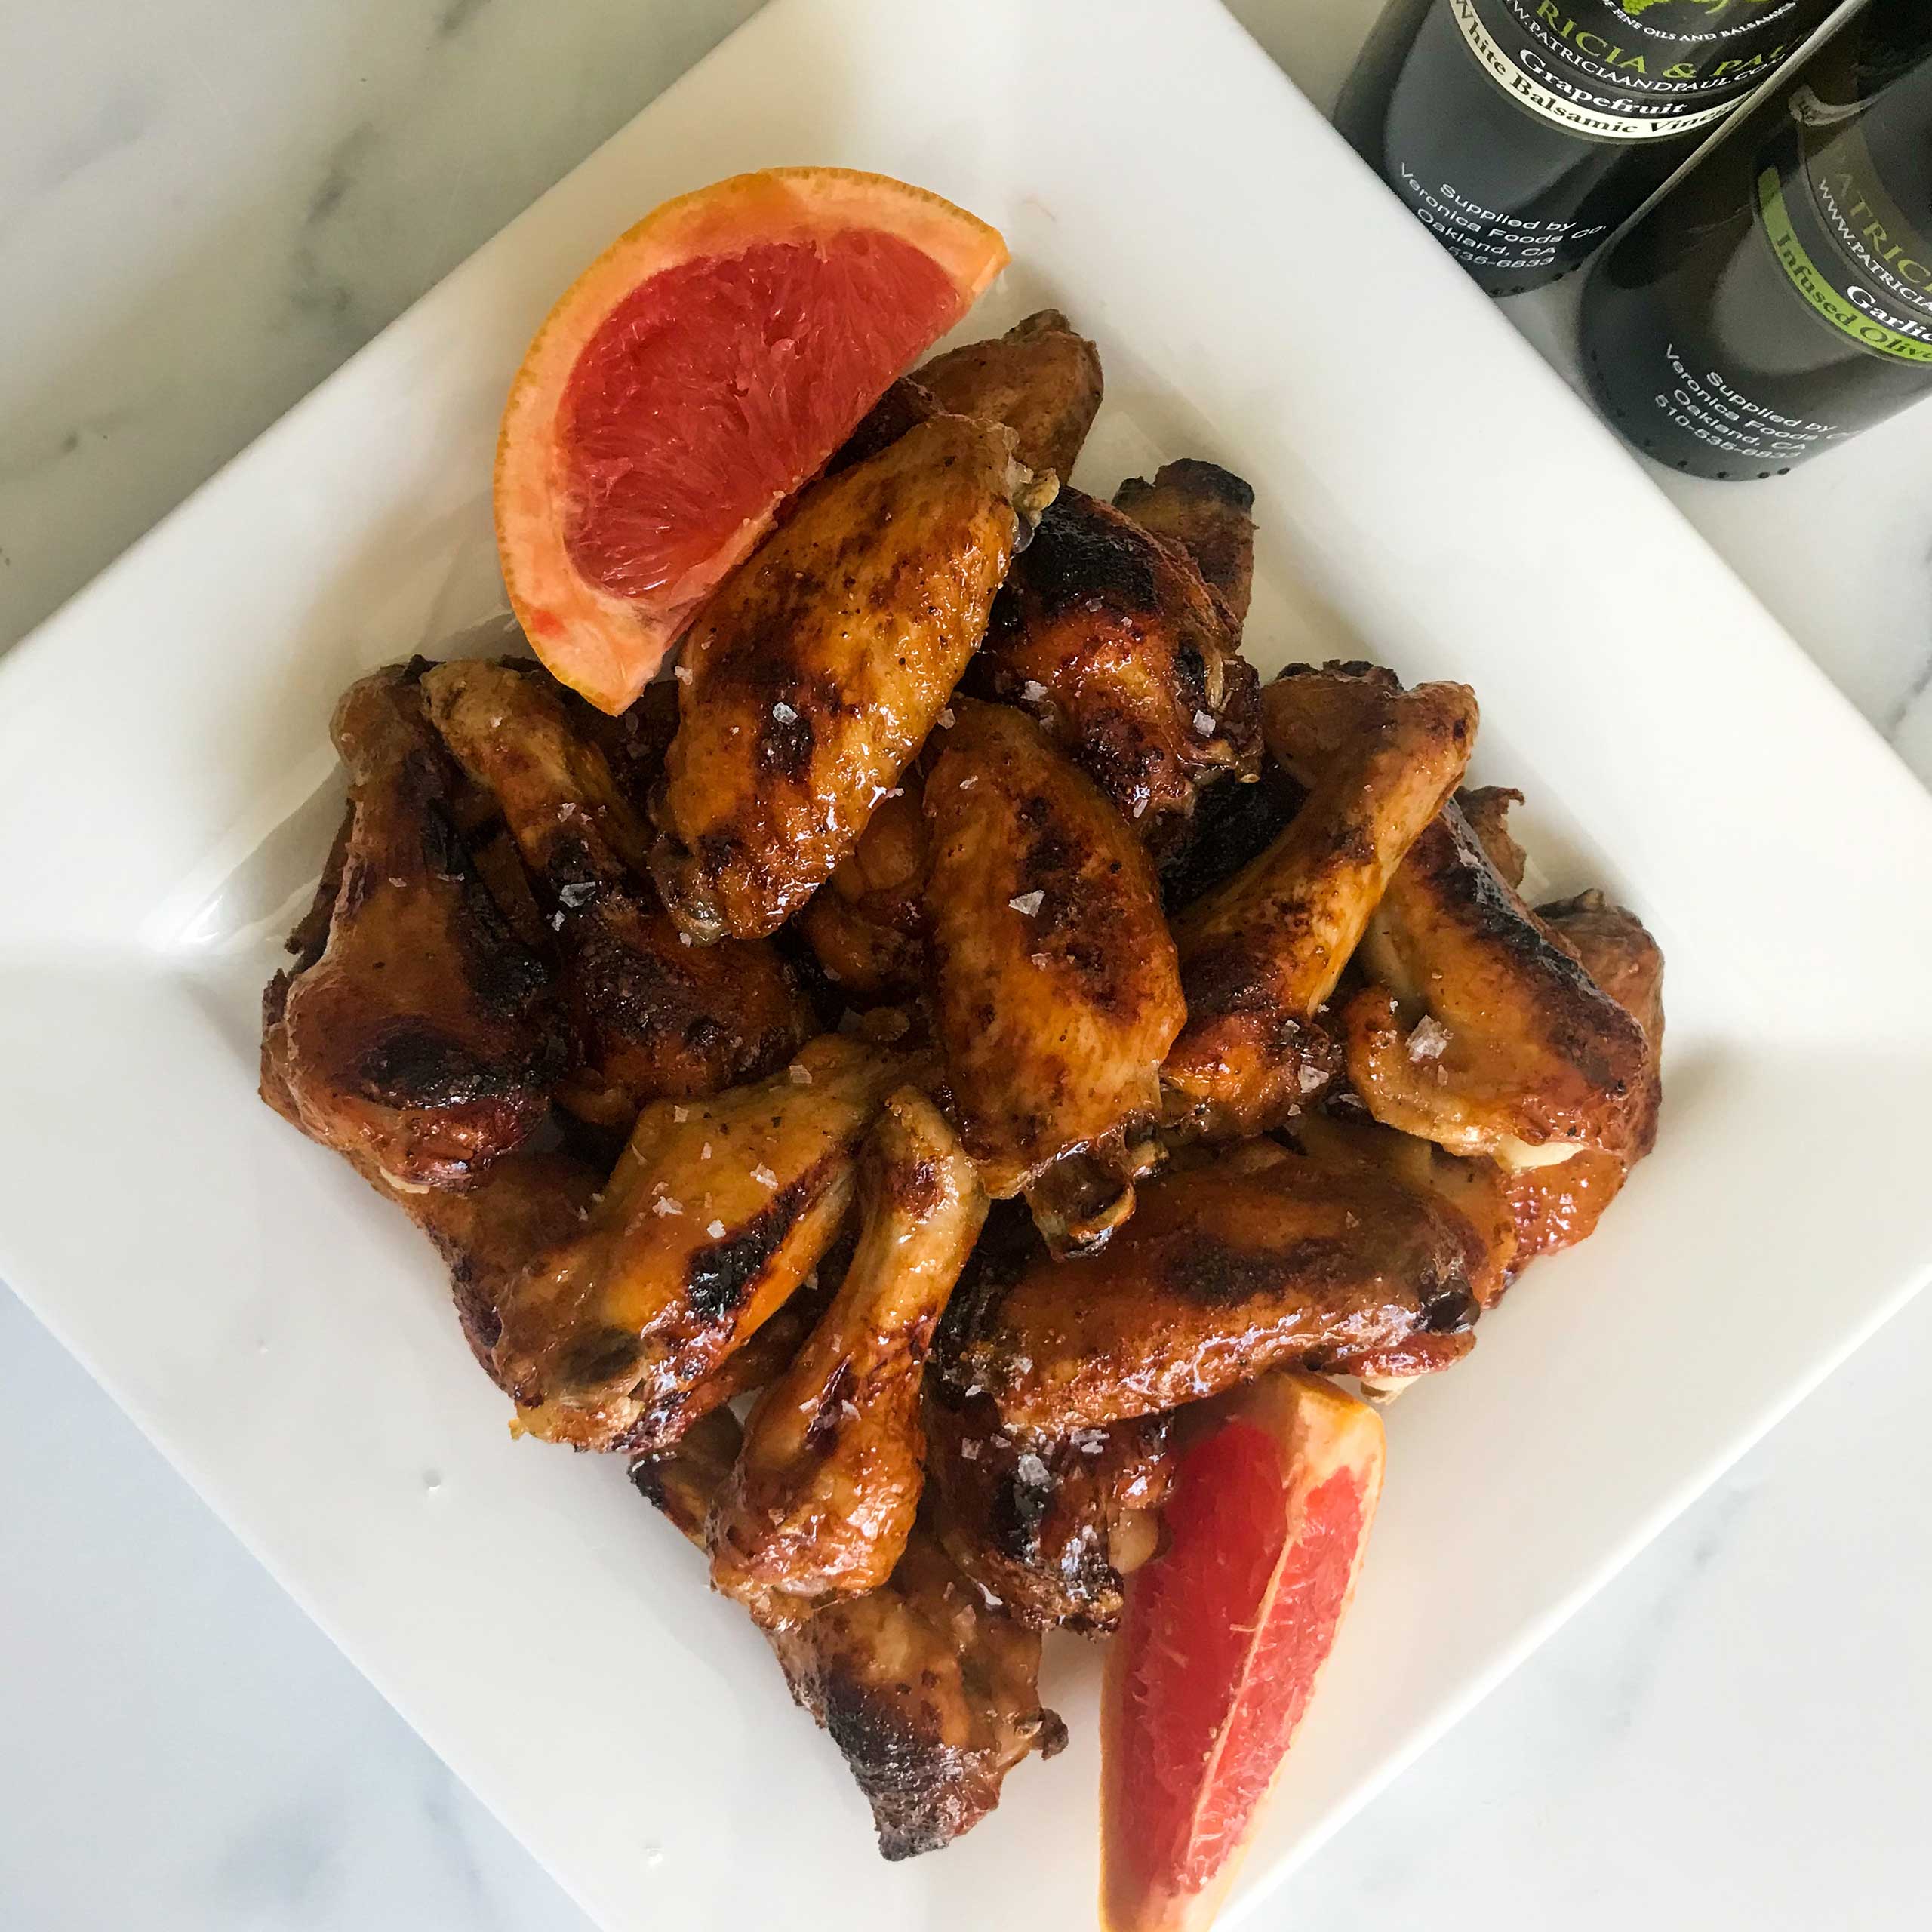 Baked-Grapefruit-and-Garlic-Glazed-Chicken-Wings-7